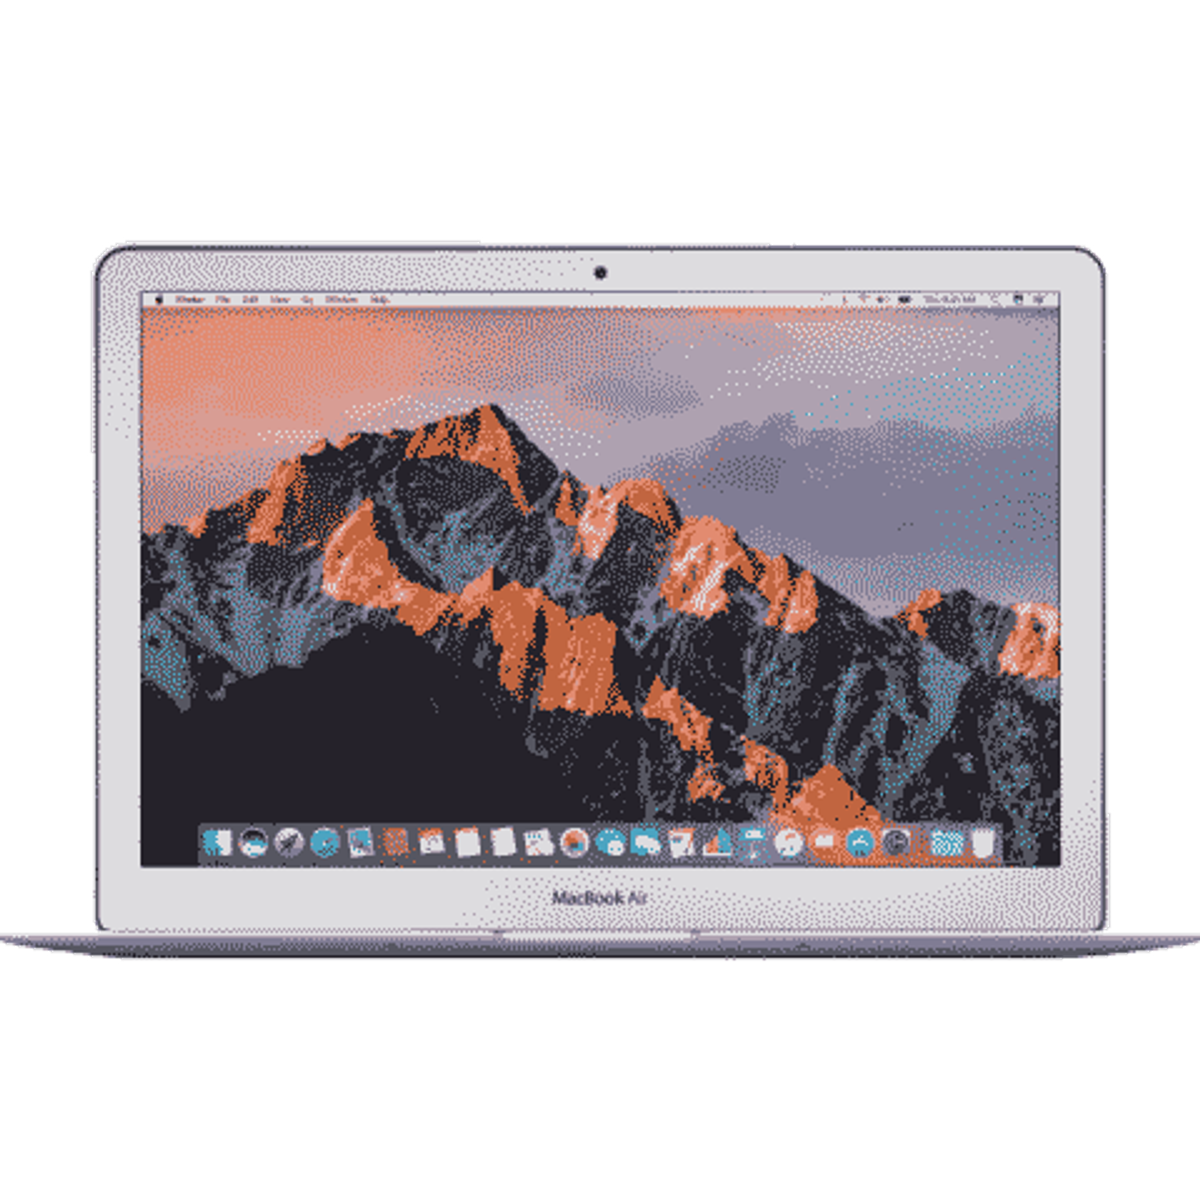 Apple macbook pro 13 inch price in india lace bathing suits for girls